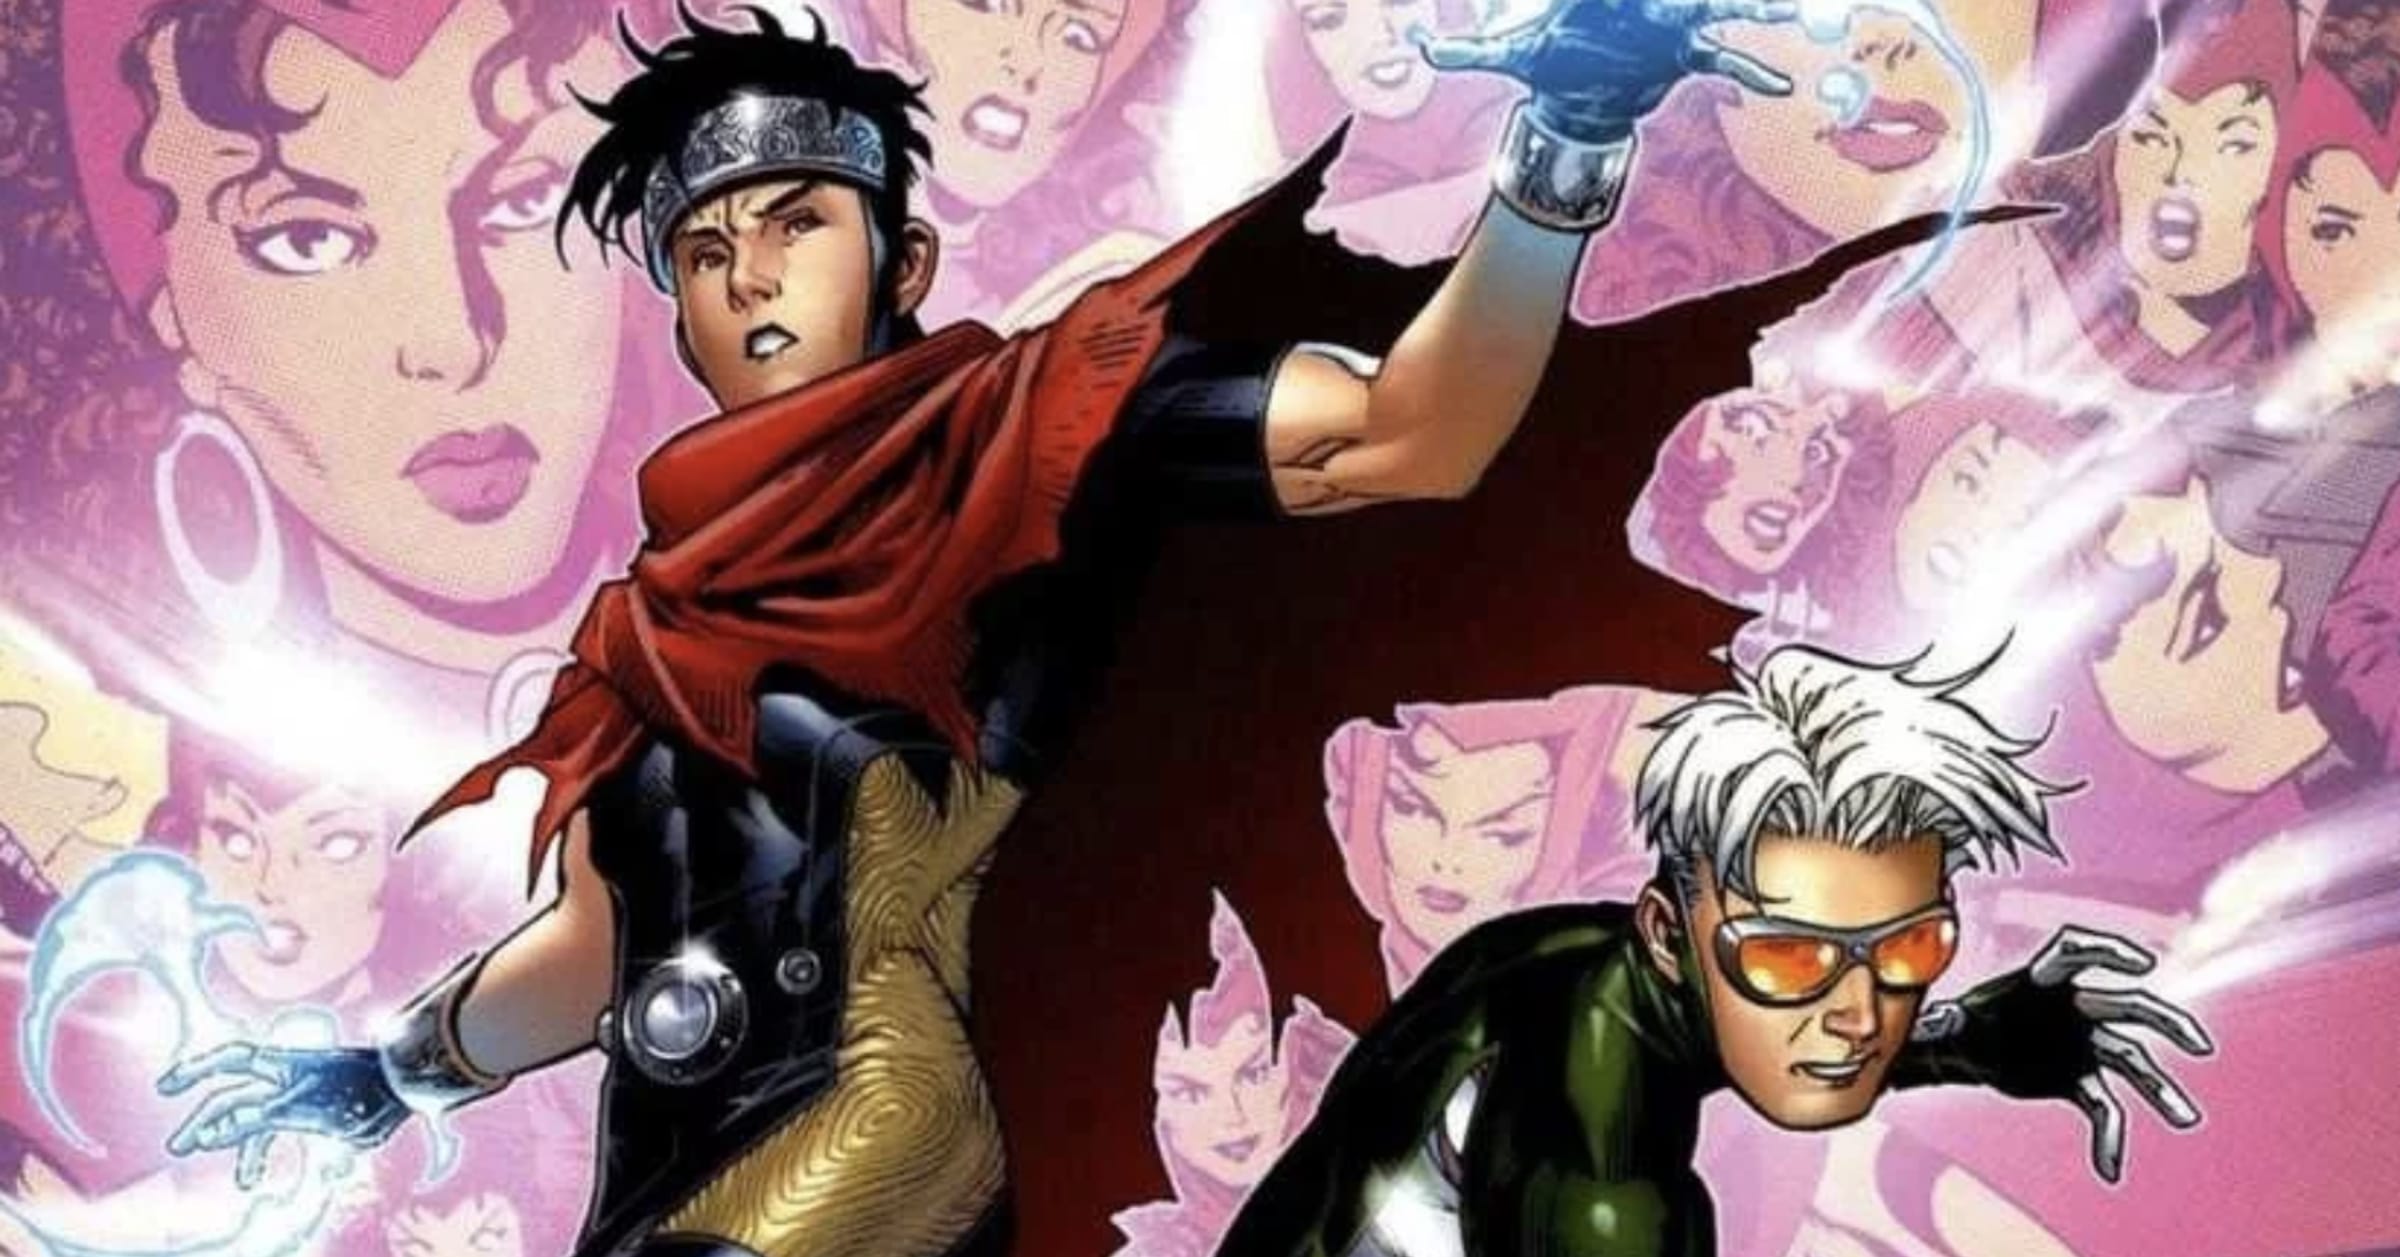 Mutant Twins Mania! Quicksilver and Scarlet Witch Confirmed For 'Marvel's  The Avengers 2′